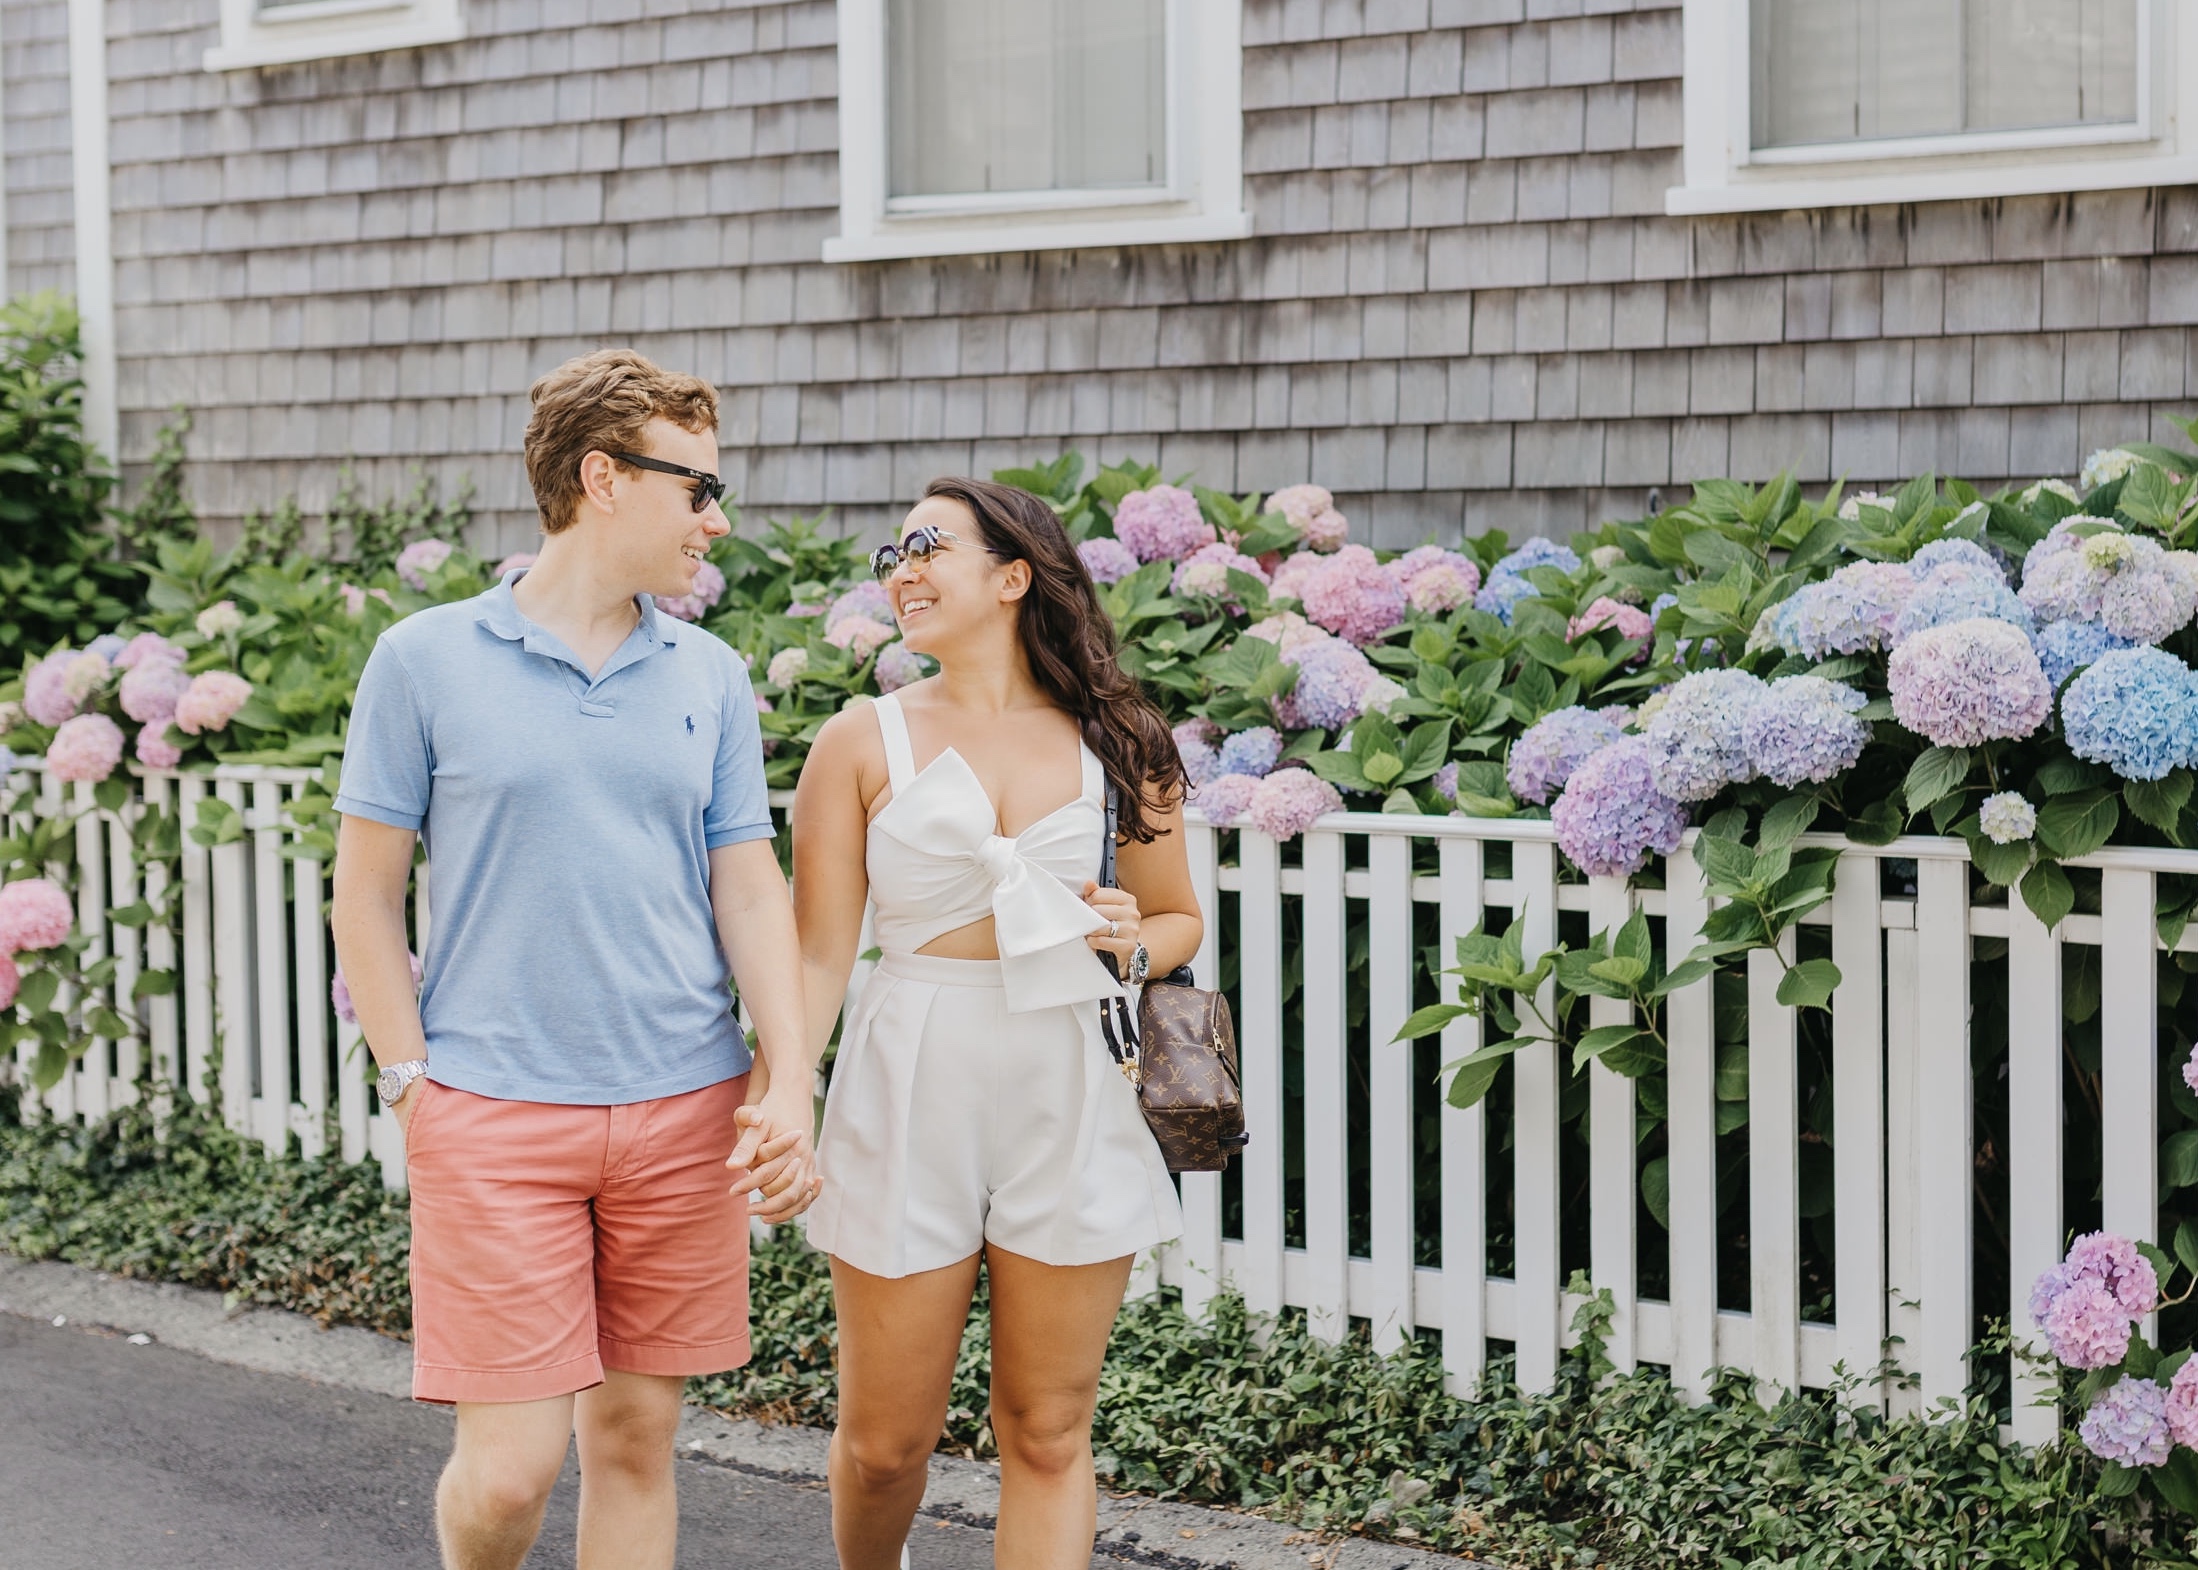 Best Nantucket Photography Spots According to a Pro